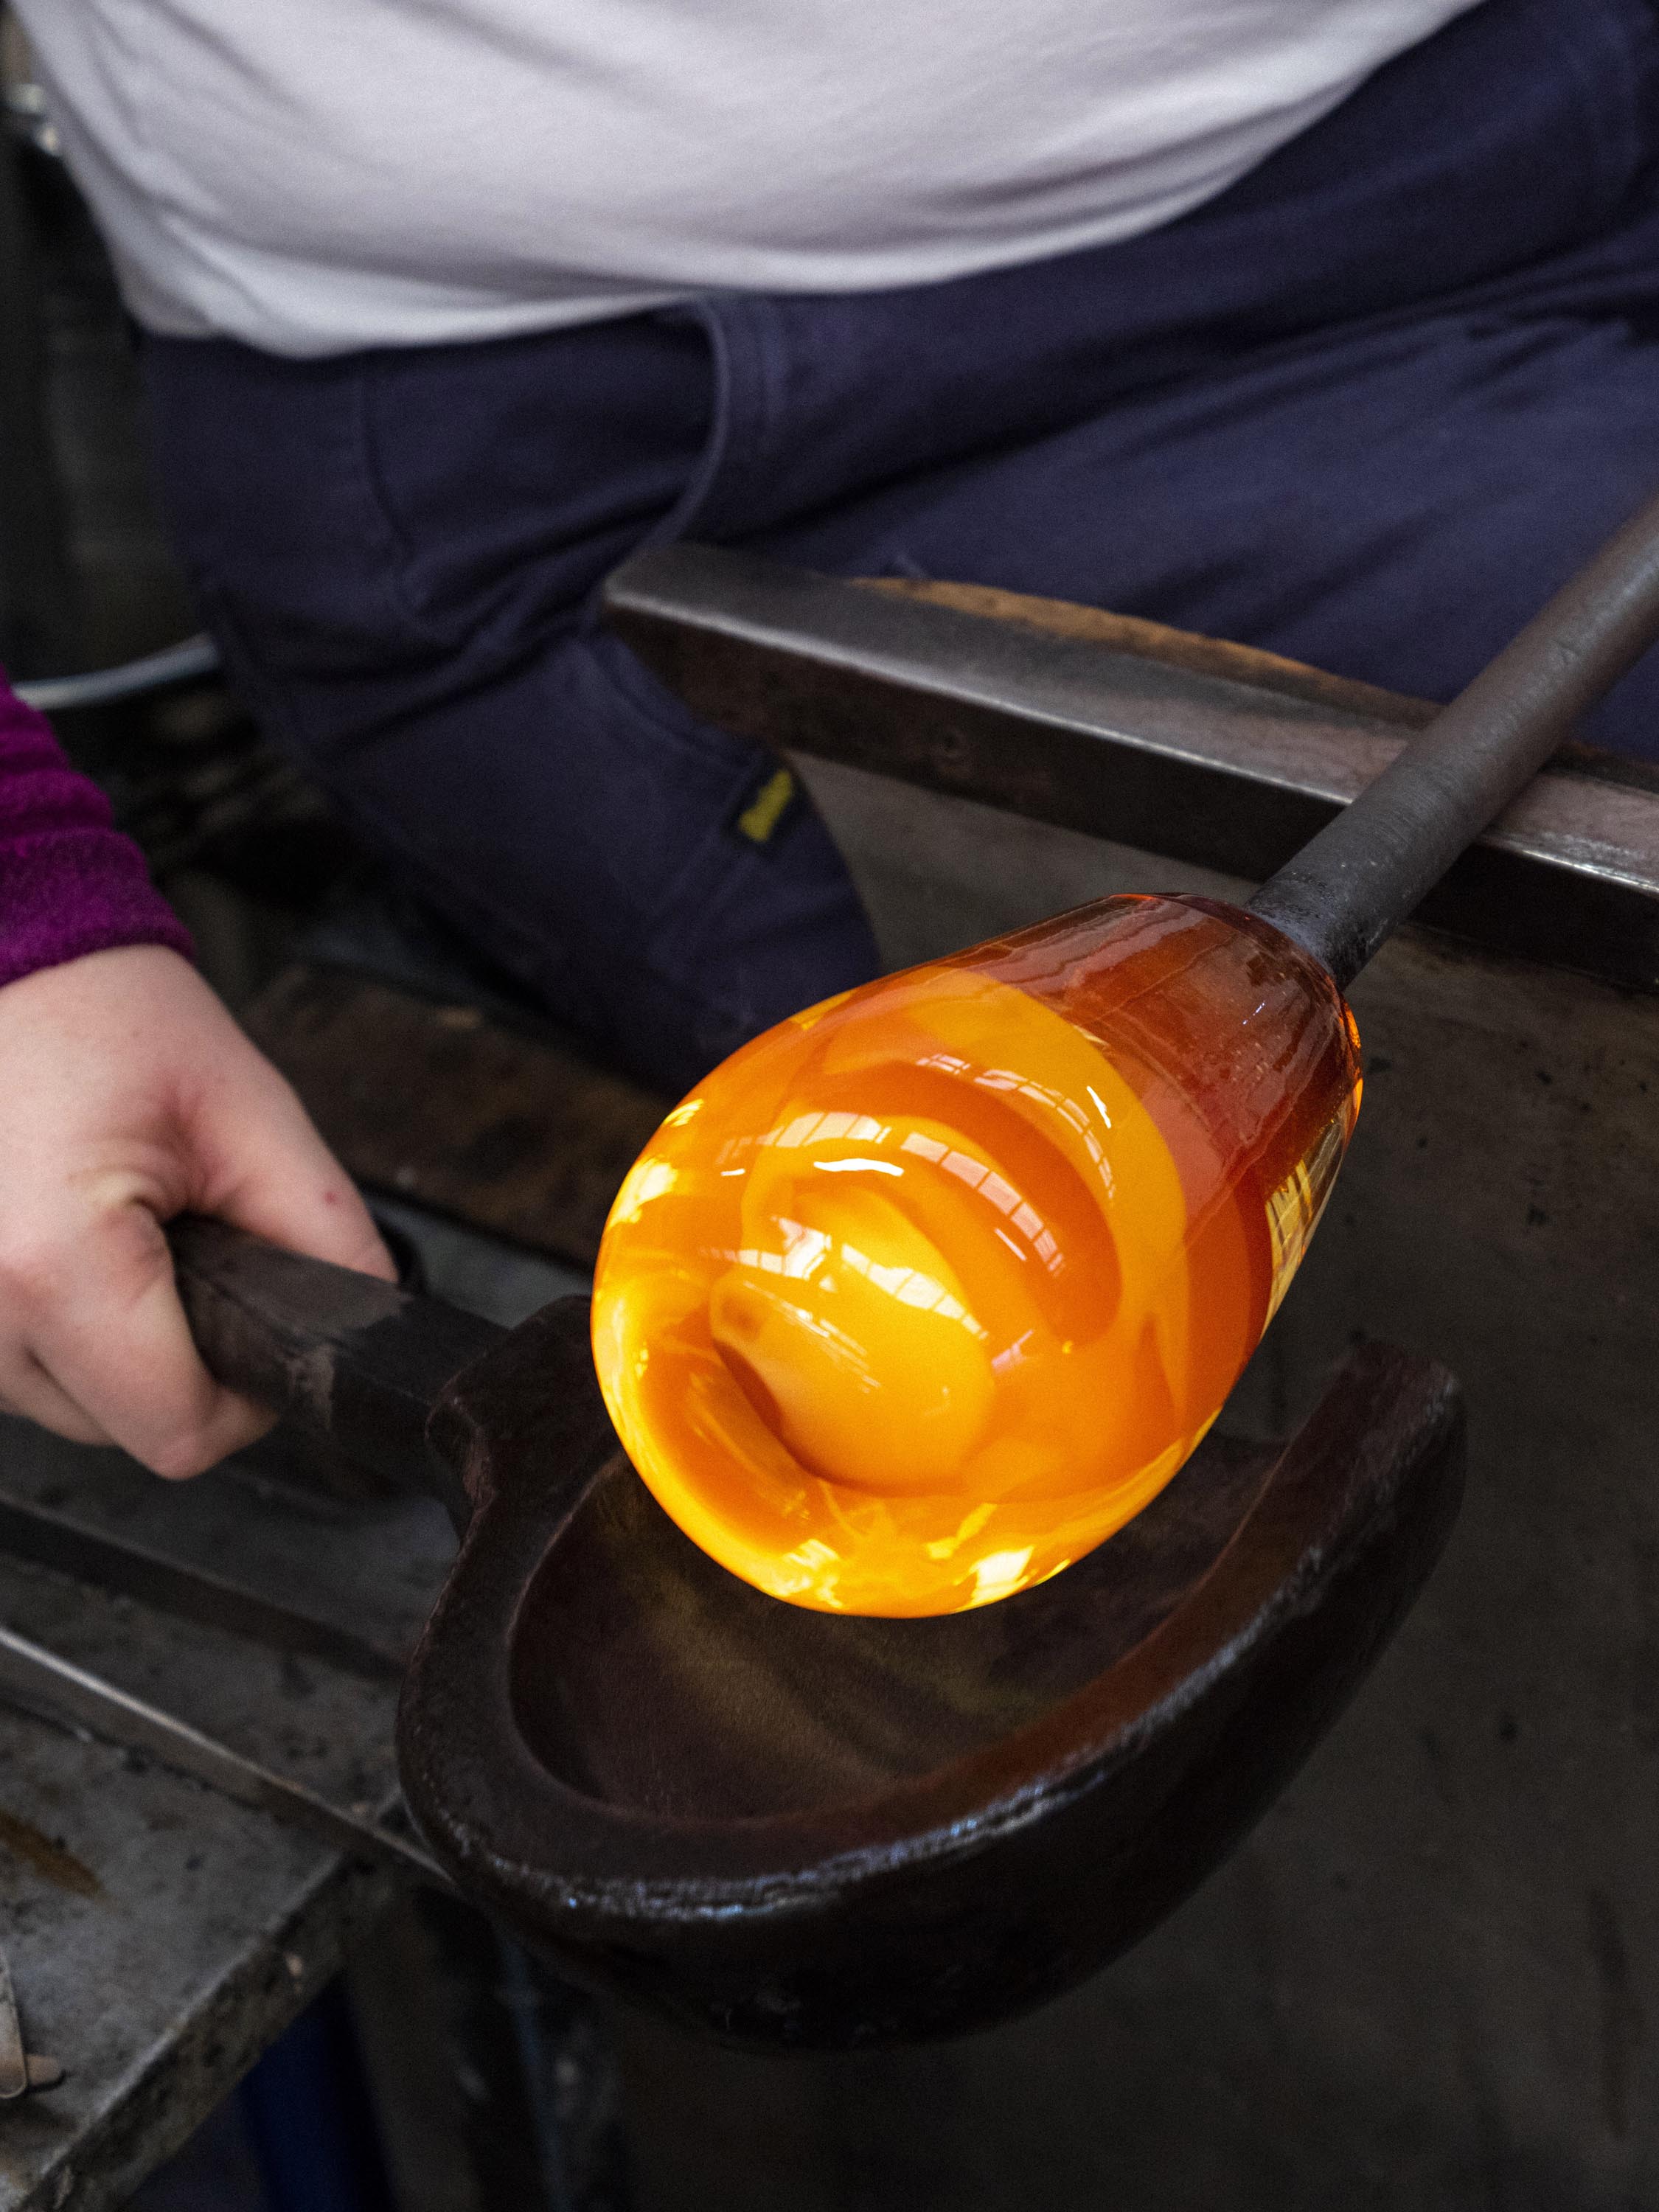 Shaping and manipulating the glass